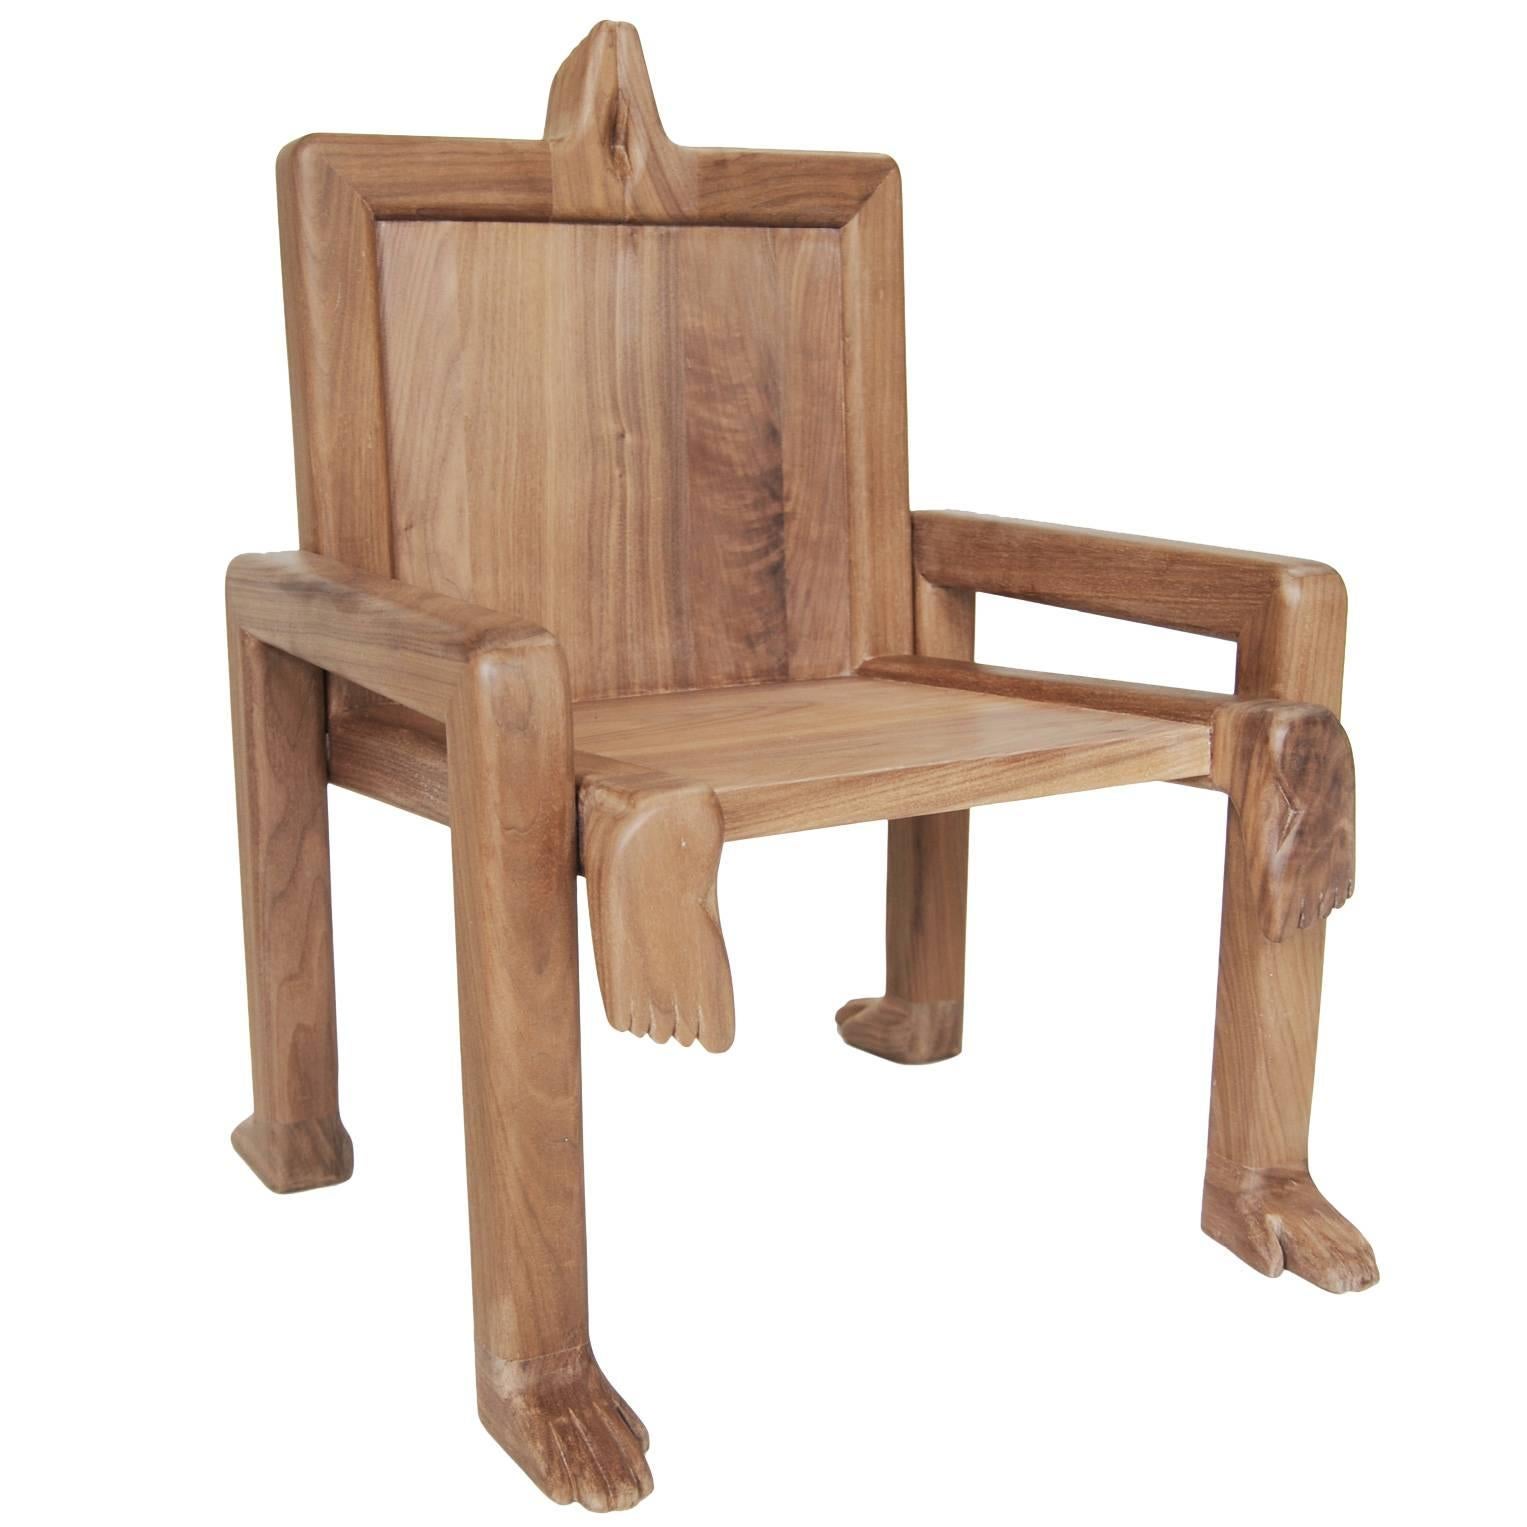 Contemporary Children's 'Crawl' Chair by Material Lust, 2015 For Sale